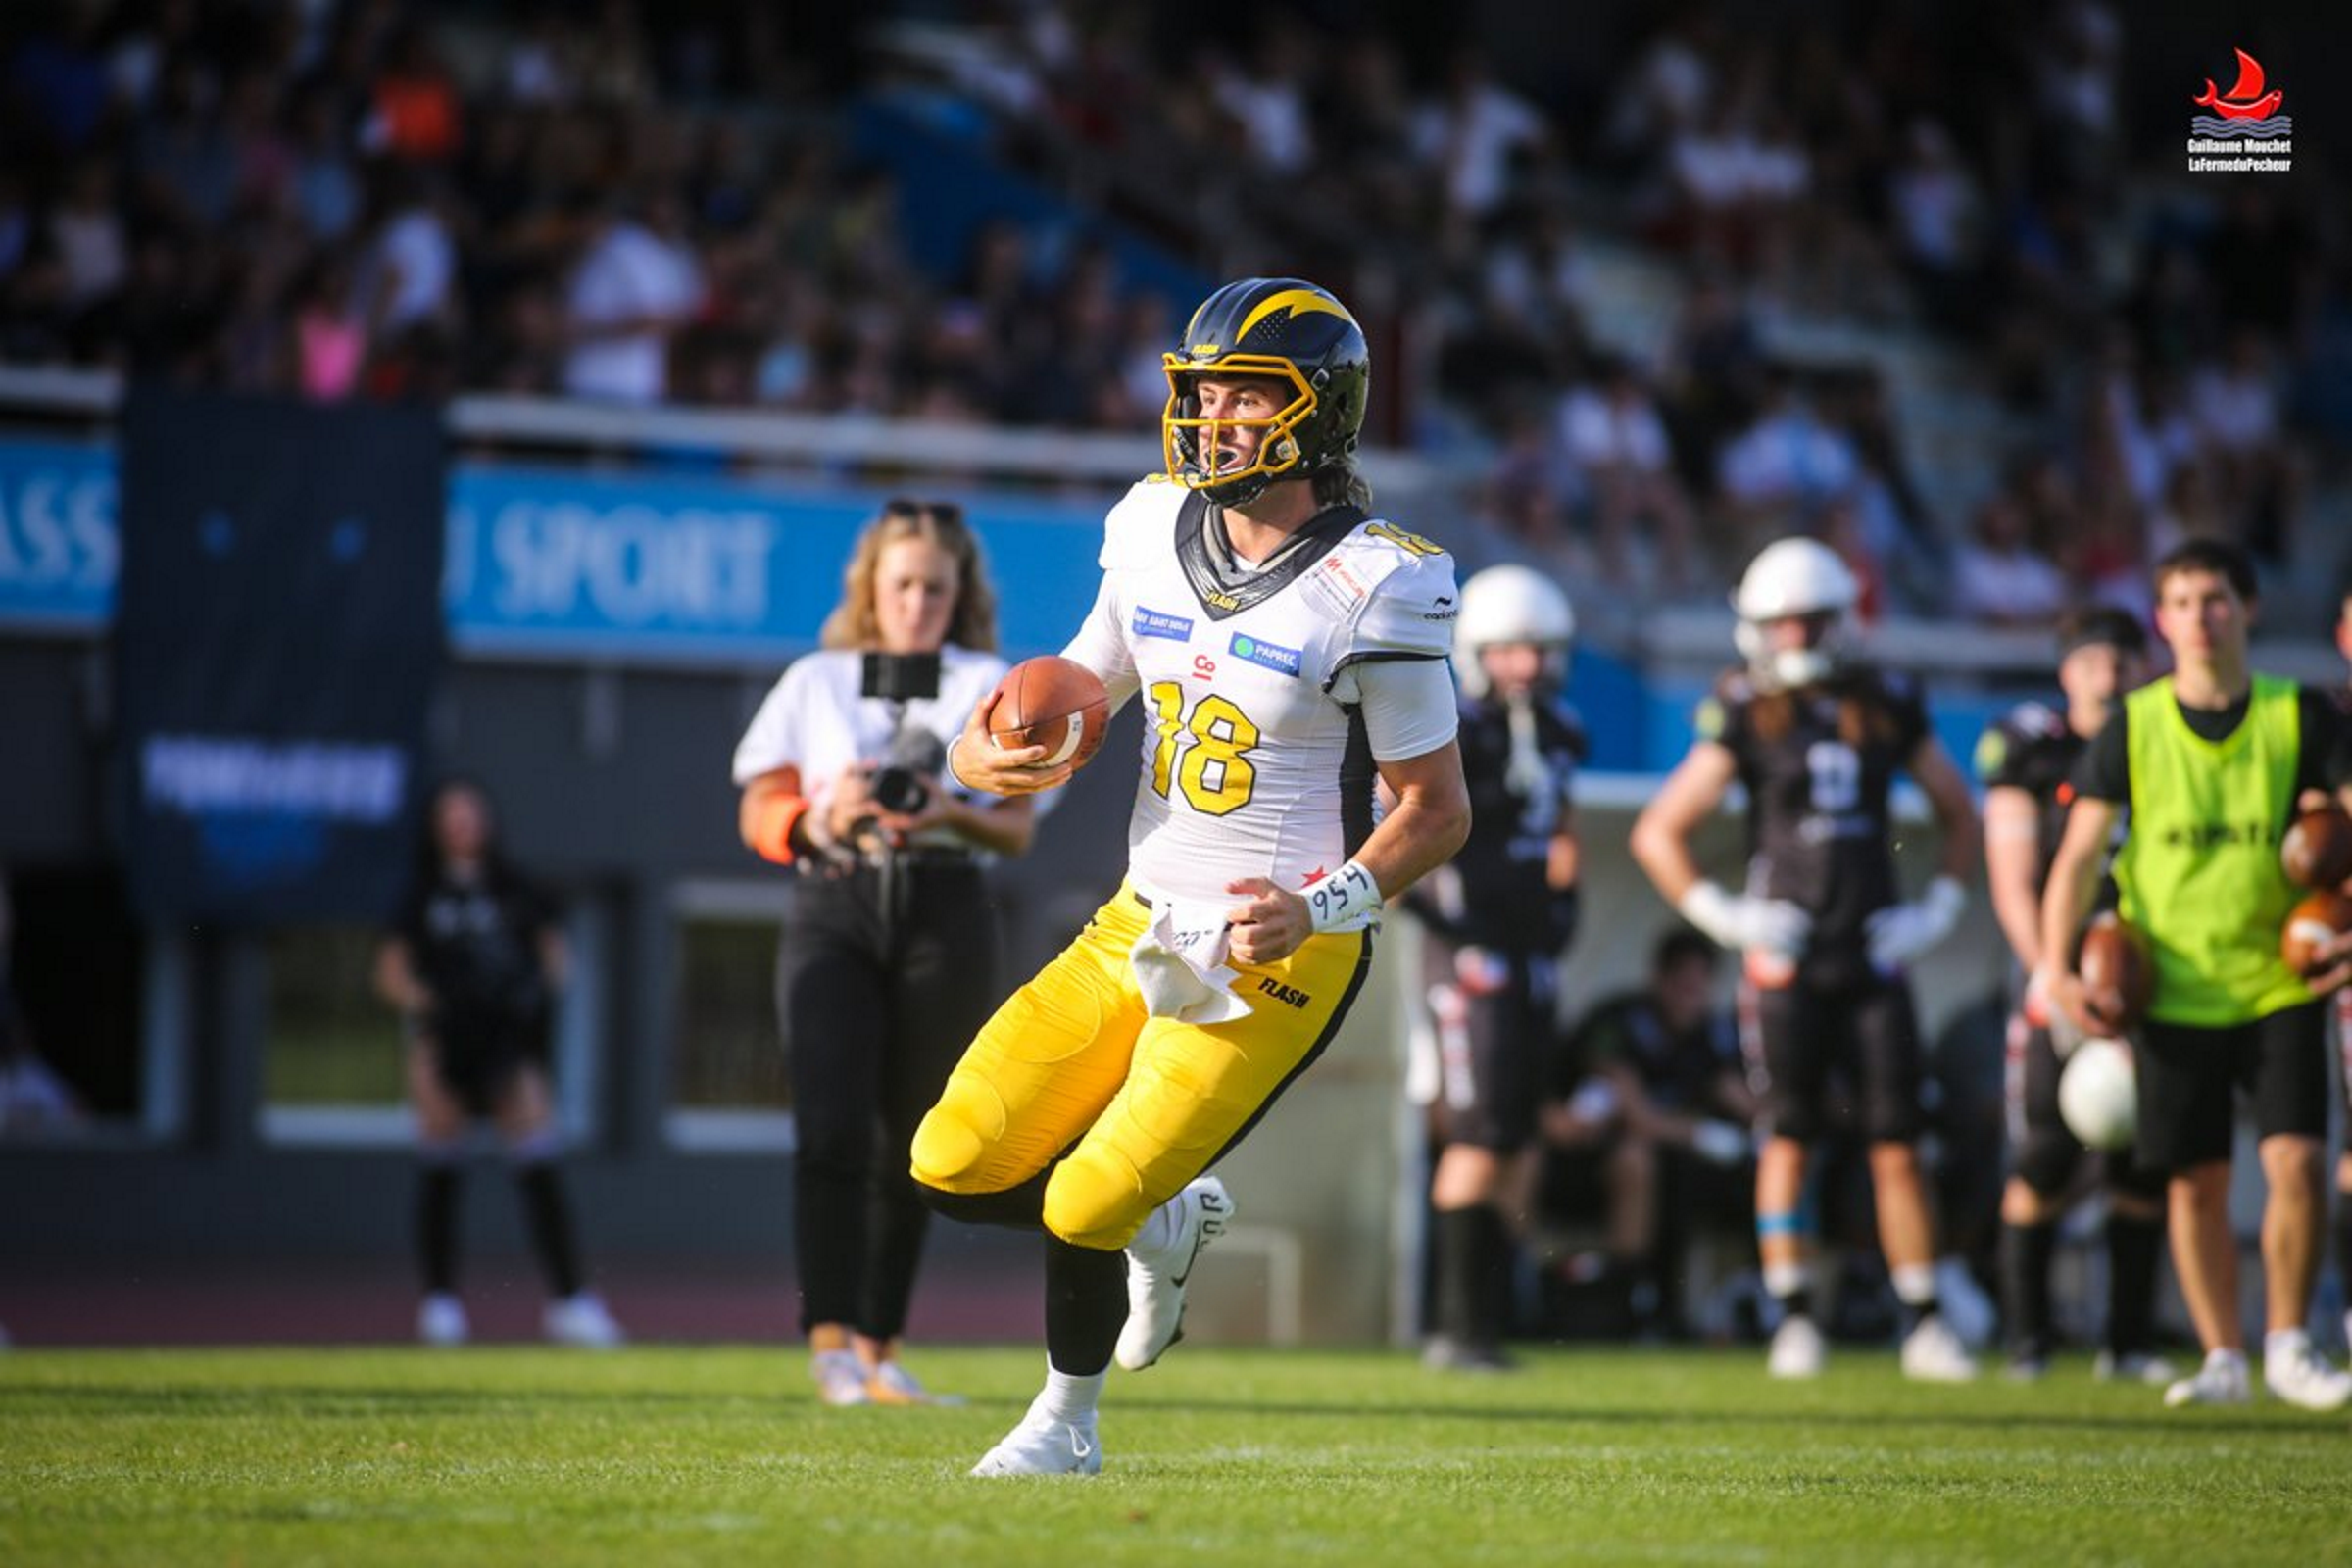 CEFL: La Courneuve Flash earn dominant win over Thonon Black Panthers to advance to semifinals